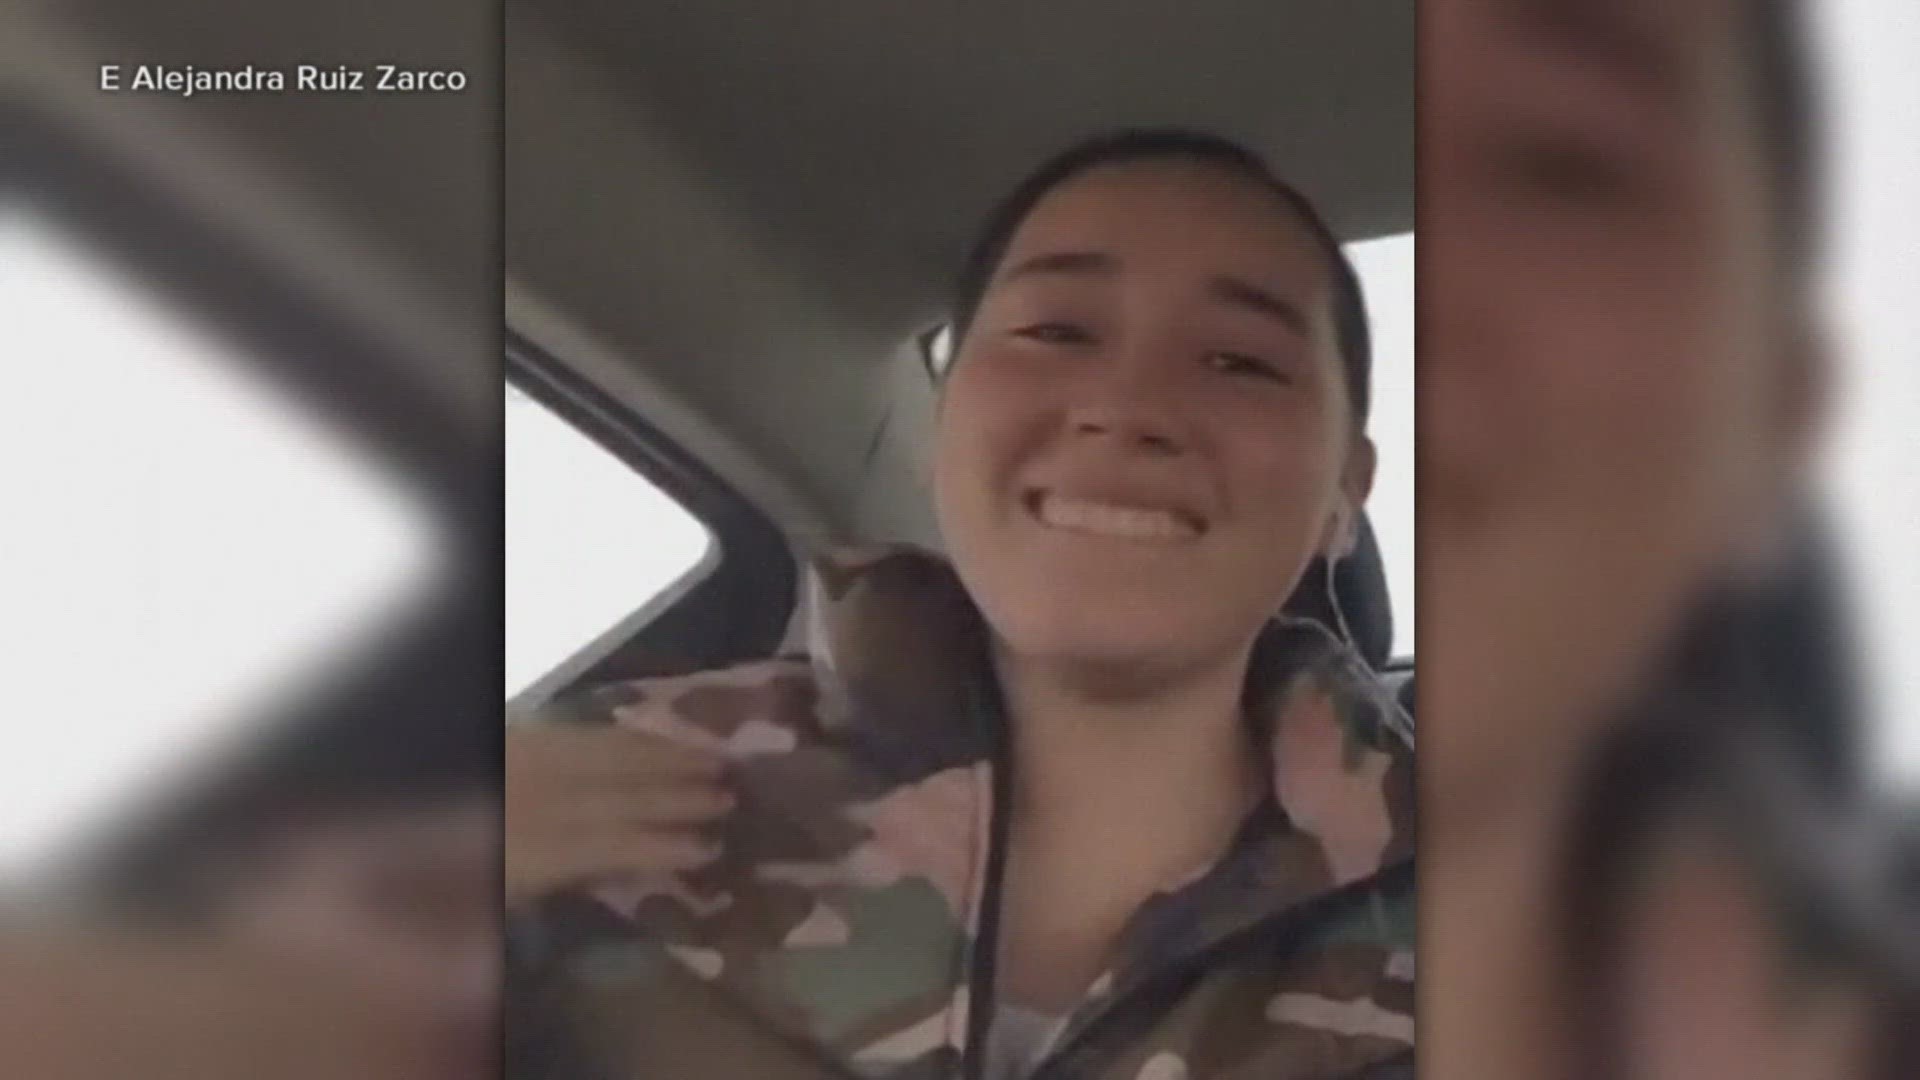 The family said the Fort Hood soldier's death was being investigated as a suicide.